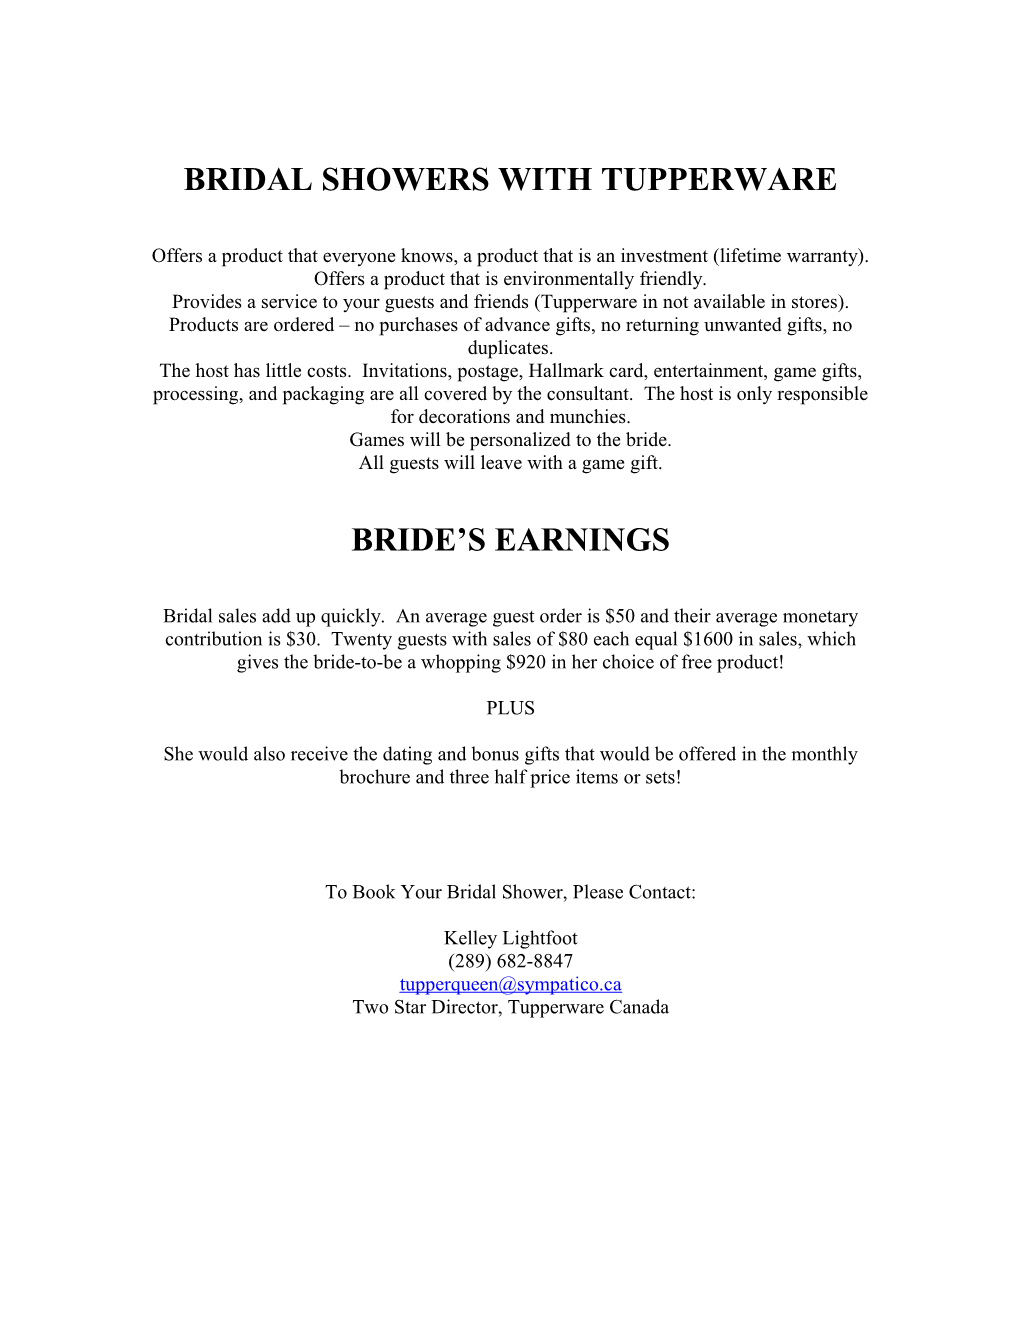 Bridal Showers with Tupperware